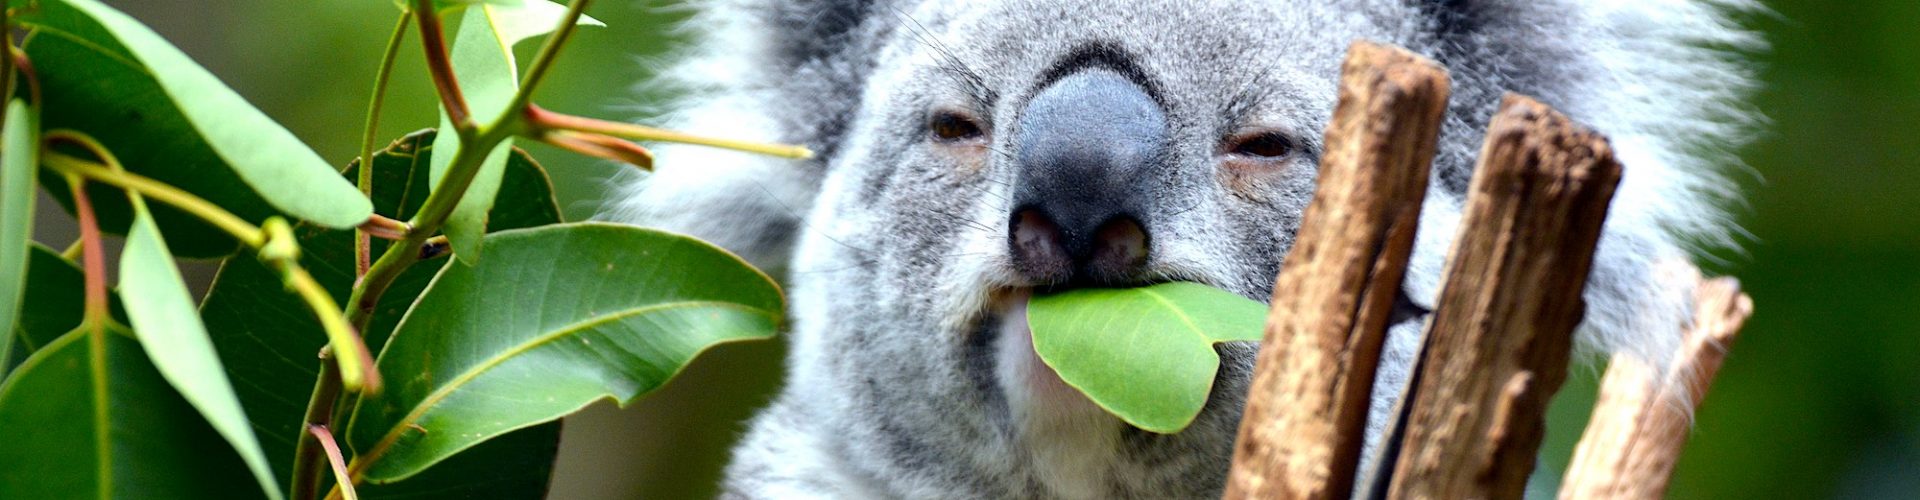 Review: Brisbane river cruise to Lone Pine Koala Sanctuary is a true-blue Aussie experience inner banner